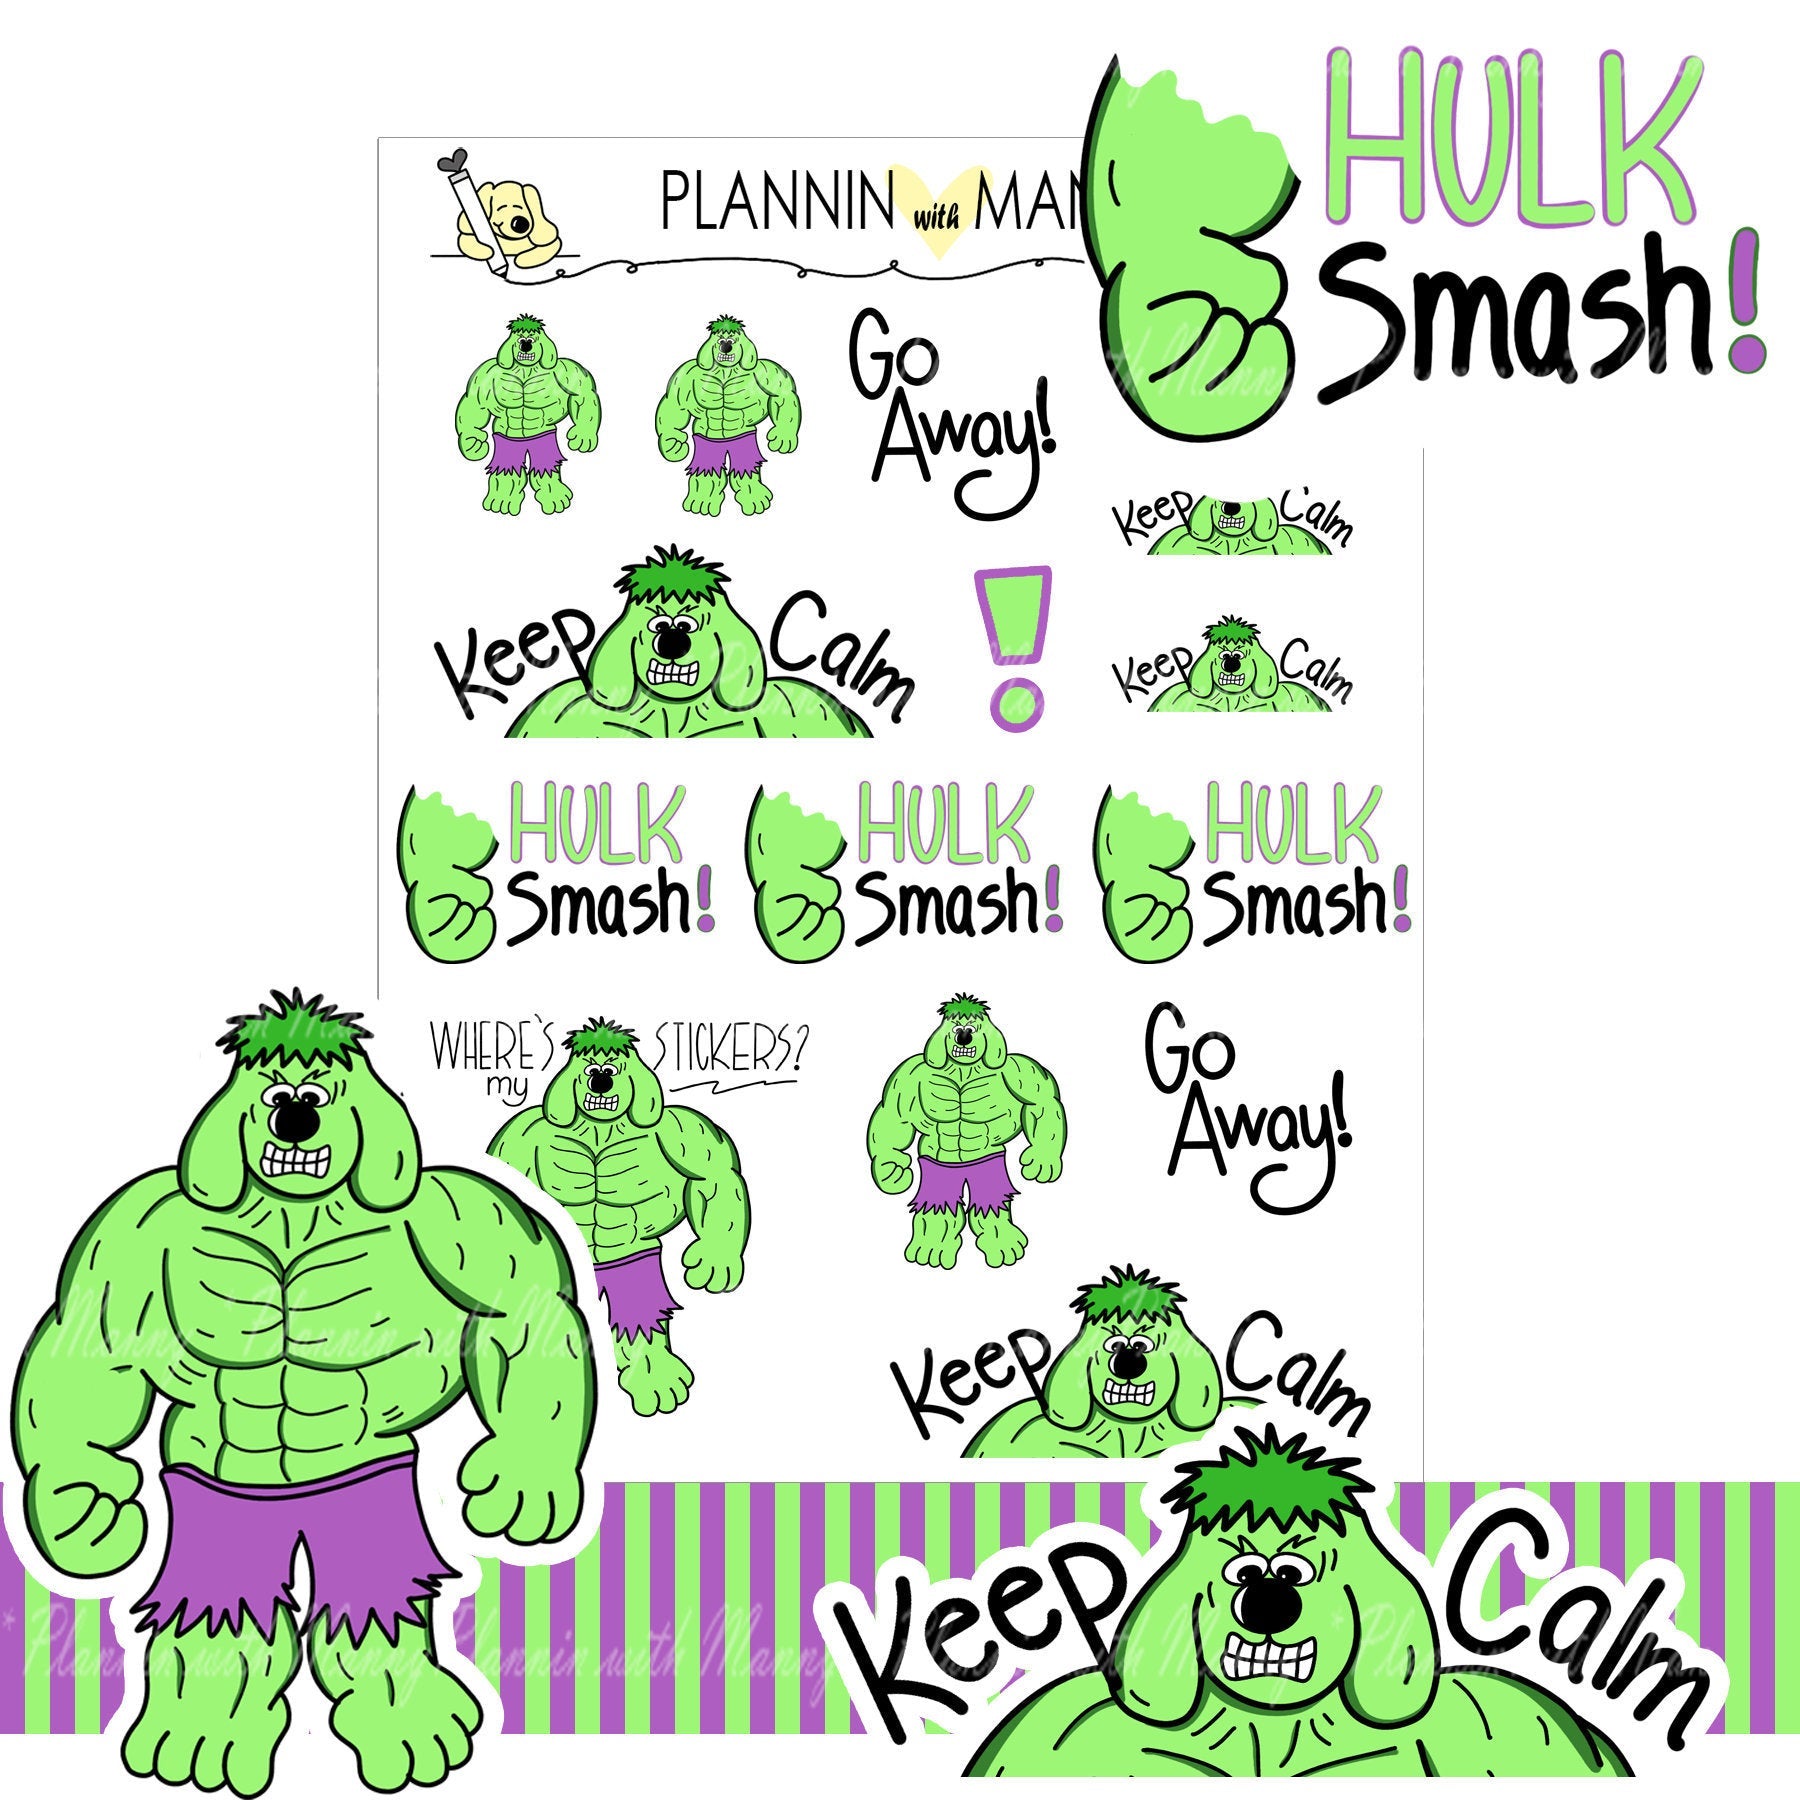 746 DON'T MAKE Me MAD Hulky Planner Stickers- Puppy Power Collection